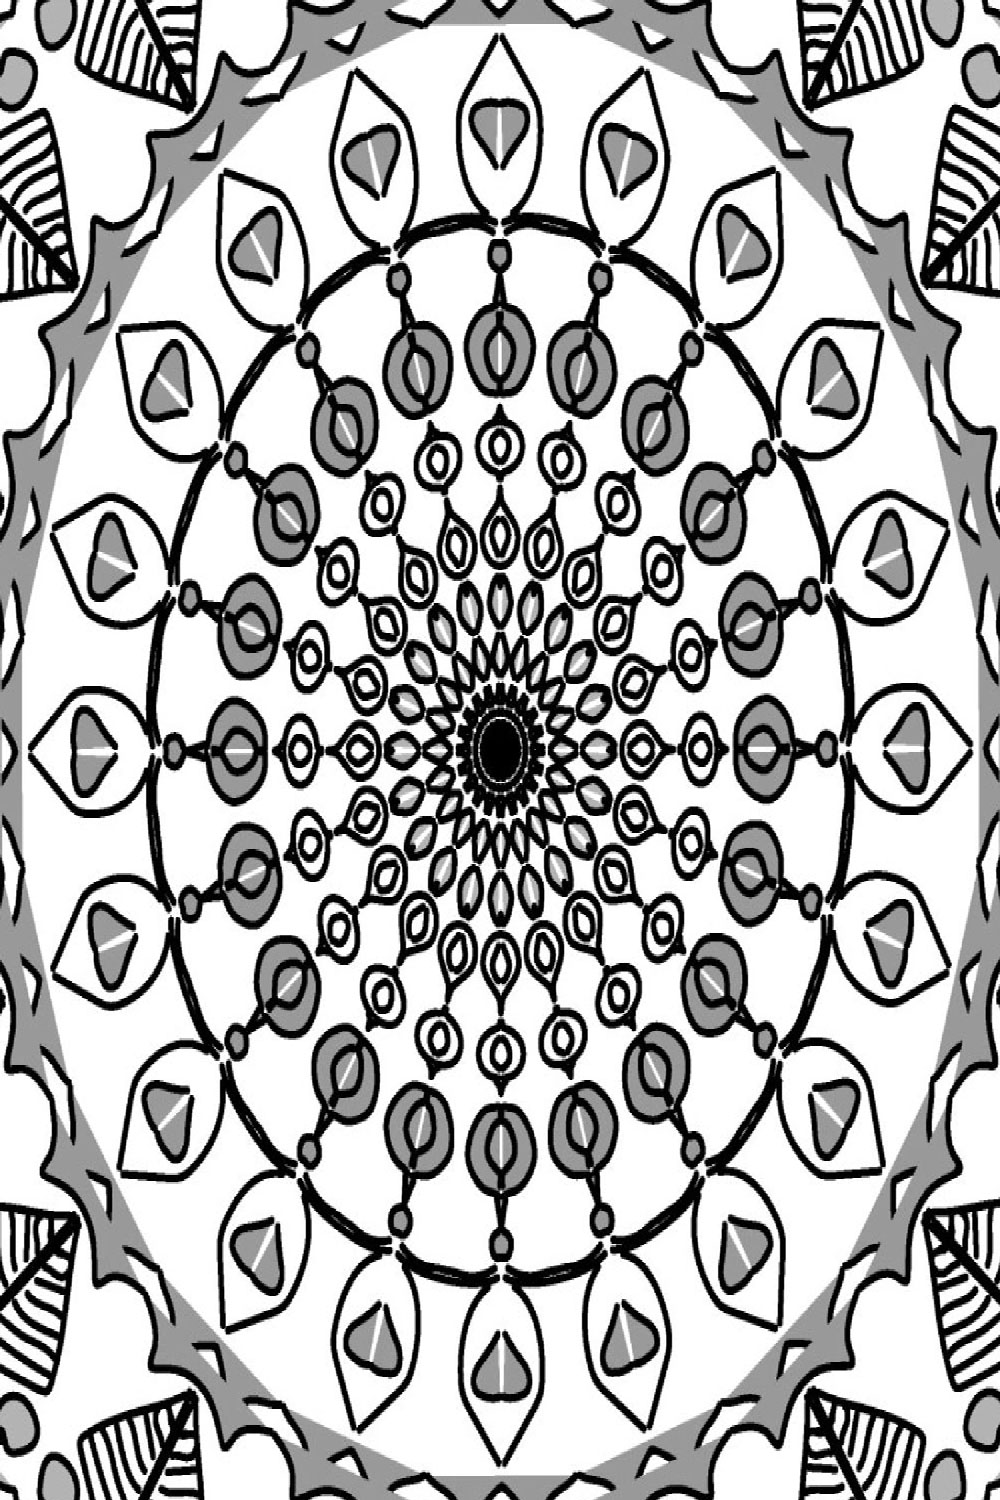 Mandala art with black and gray pinterest preview image.